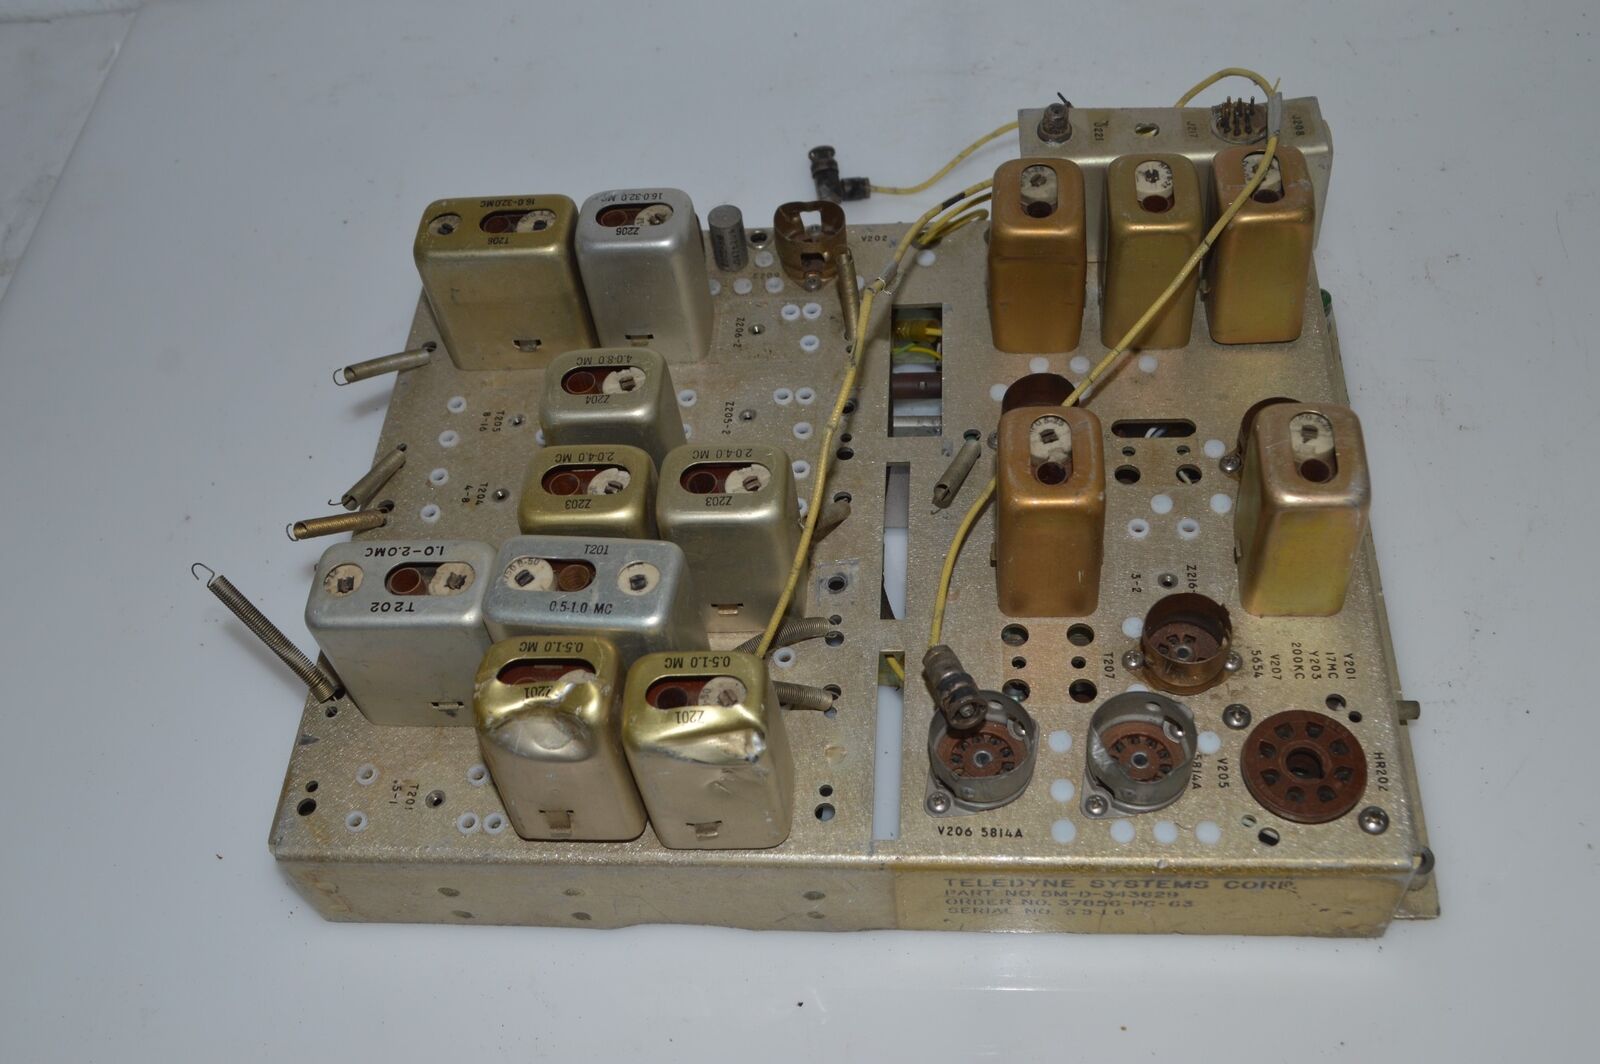 *TC* TELEDYNE SYSTEMS CORP P/N SM-D-343629 TUBE AMPLIFIER (IPS31)